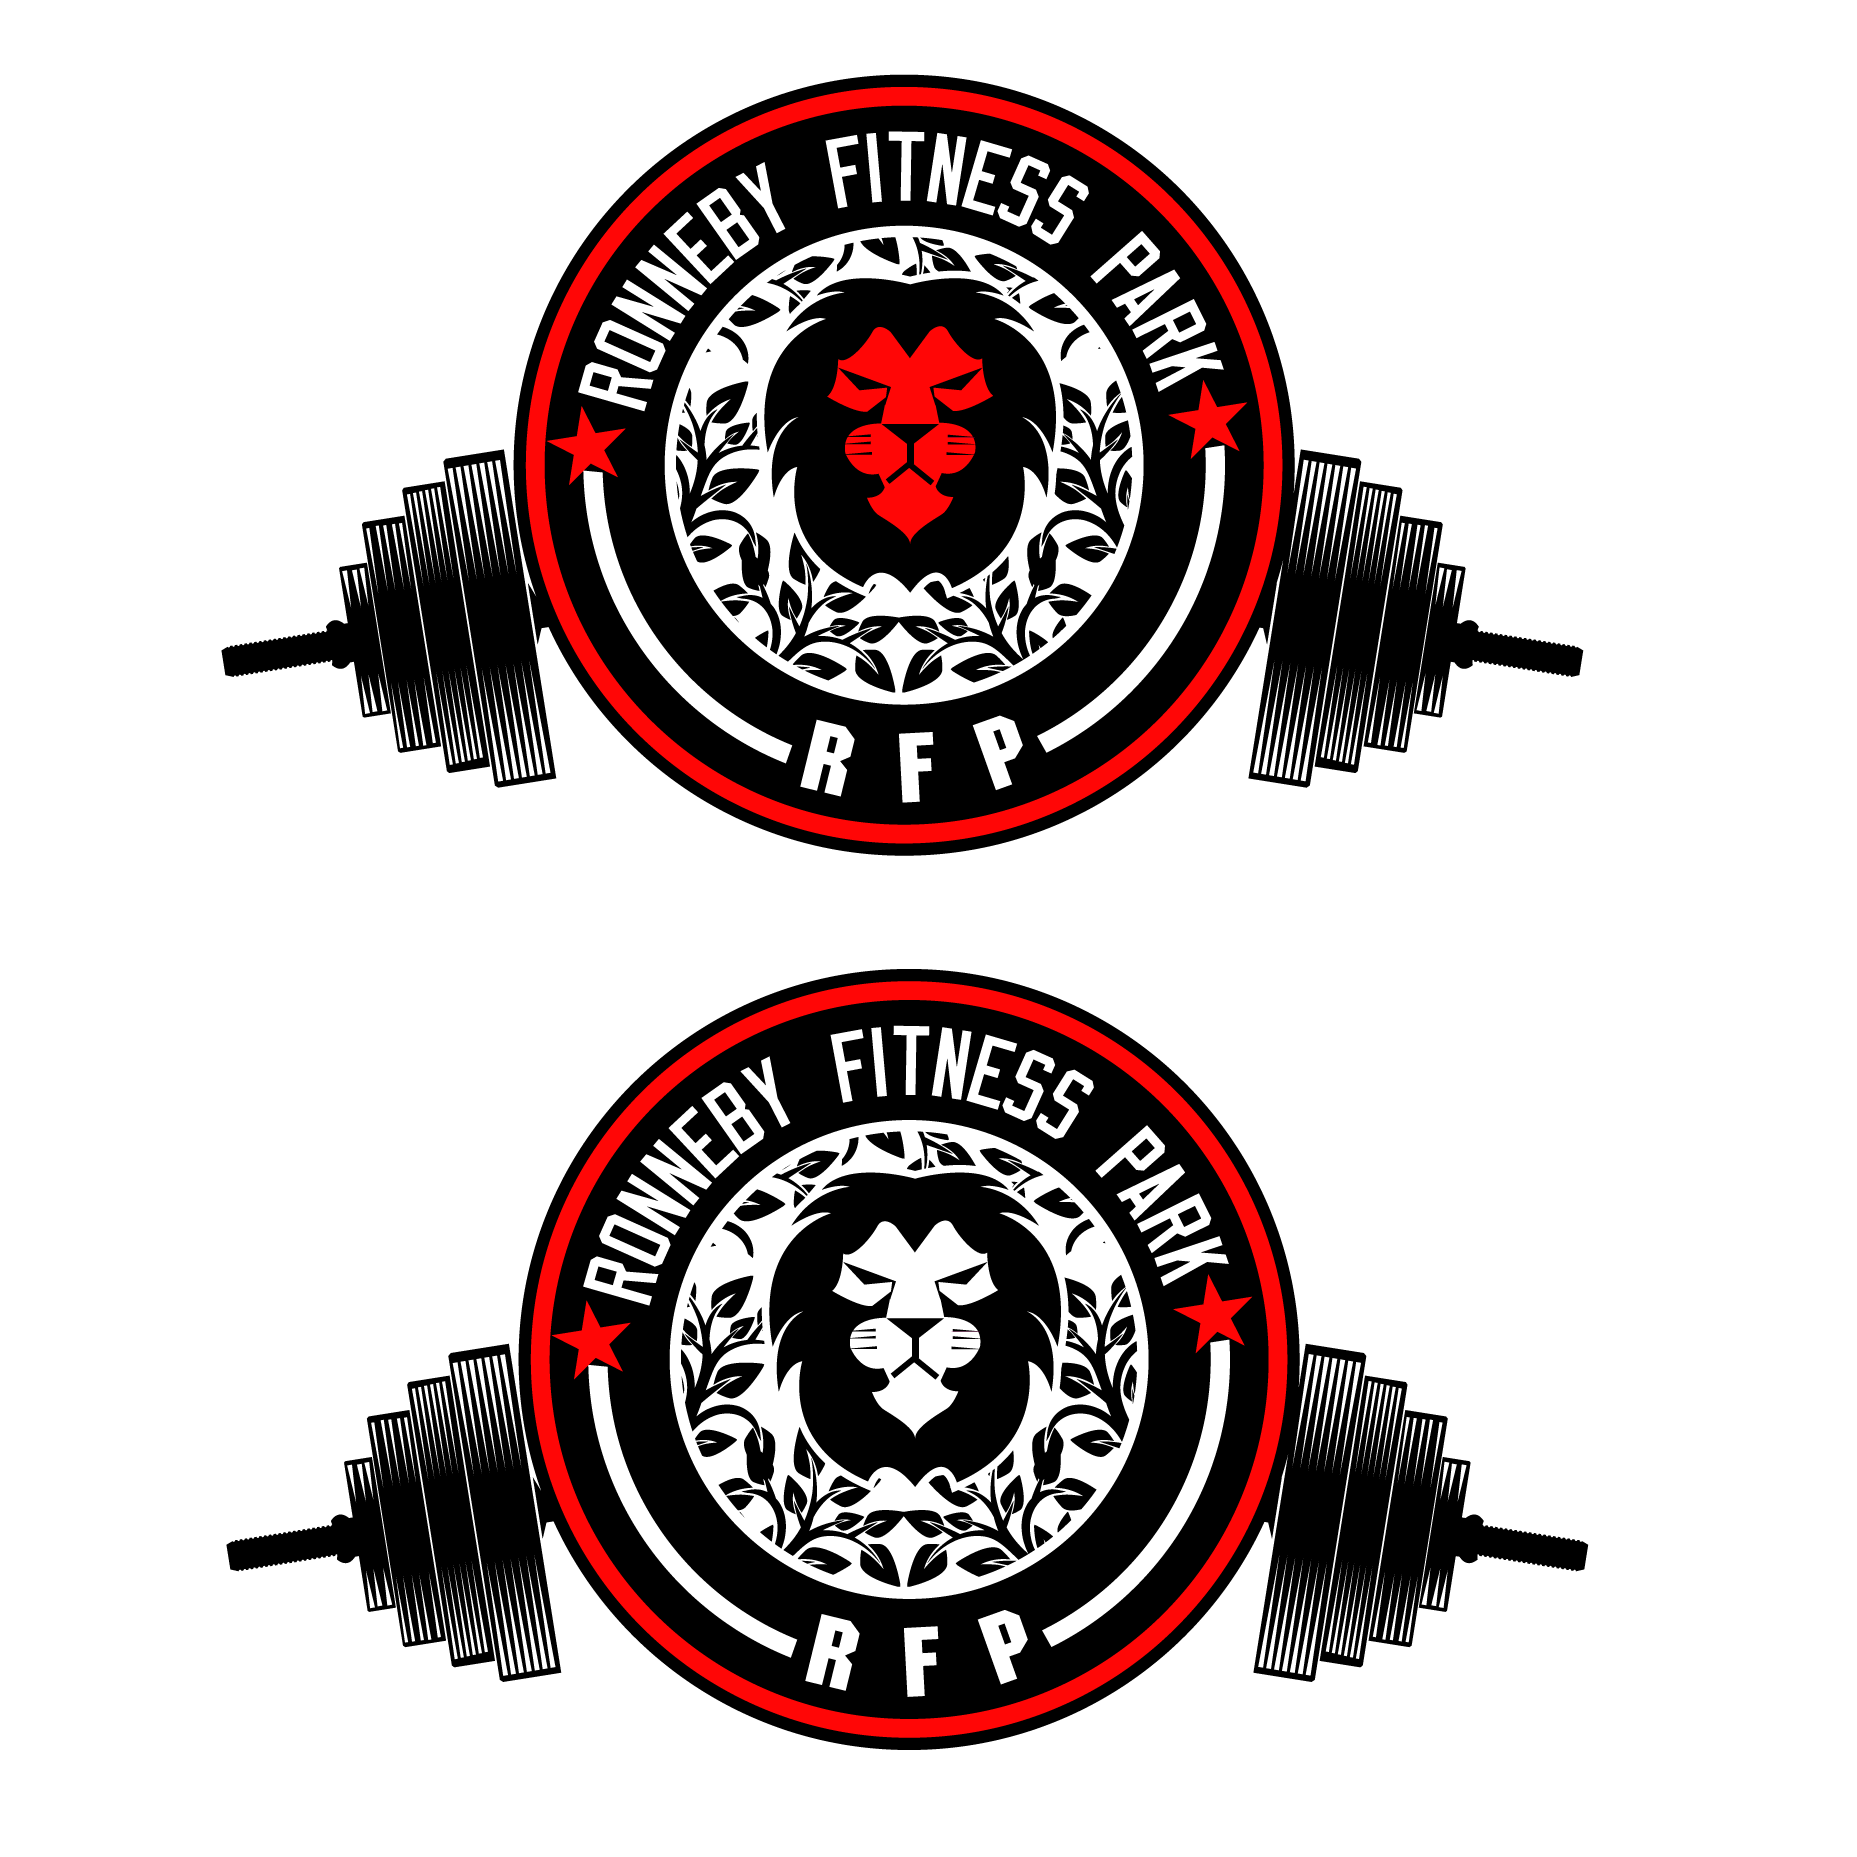 Create a Cool Logo that people will remeber for a Outdoor Obstacle course/combined outdoor gym.